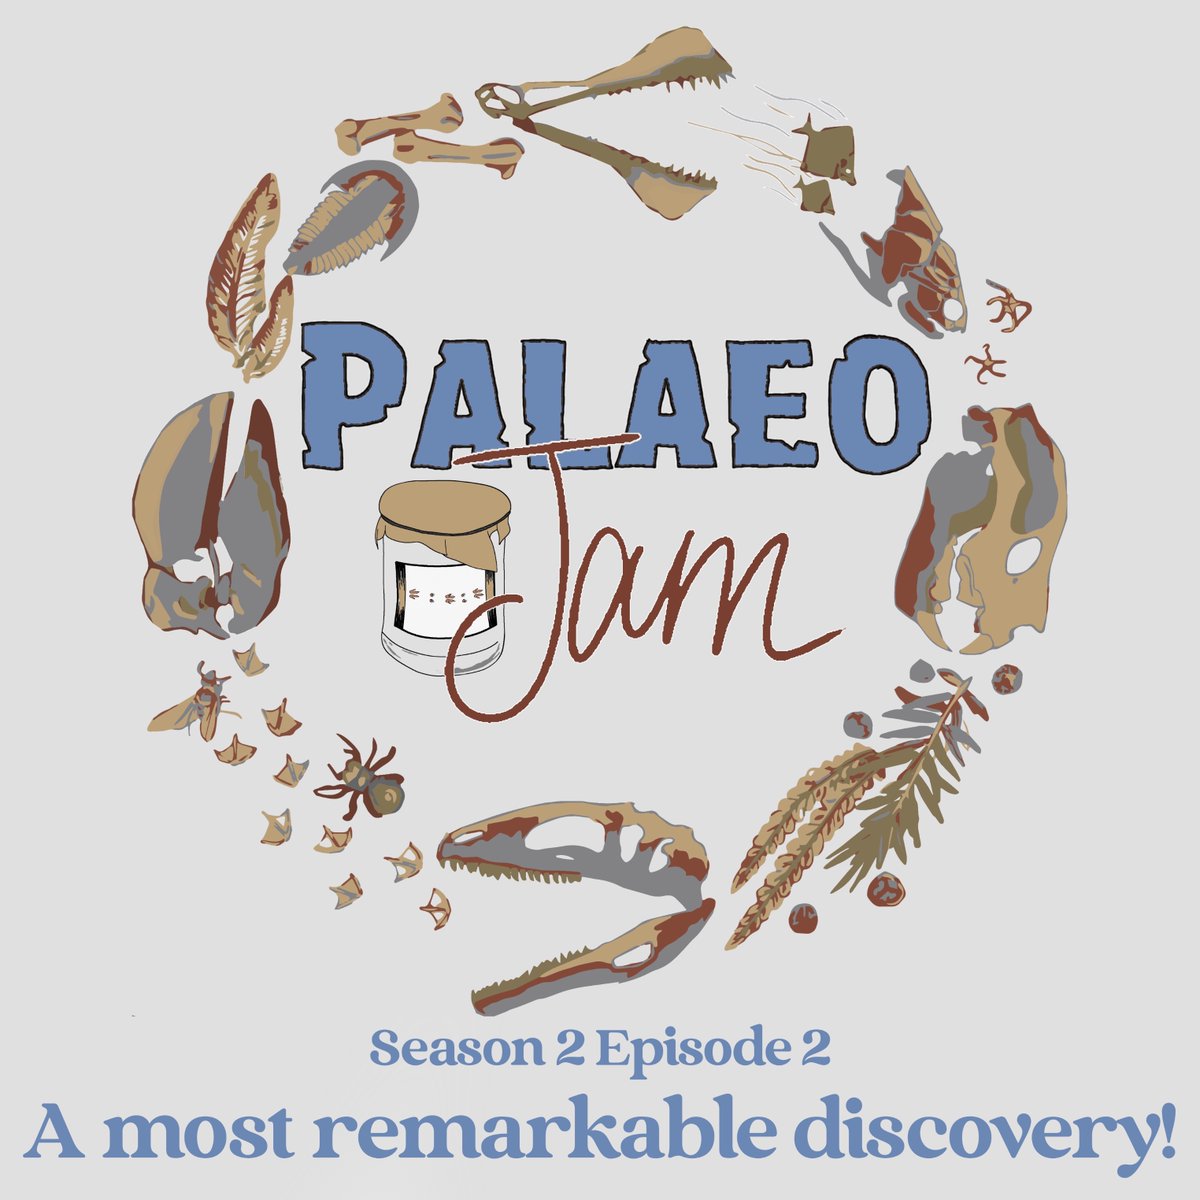 The latest episode of Palaeo Jam has dropped & features @Heapsgood chatting with @e_m_knutsen and Claire Speedie of @MTQ_Townsville. In this episode, they discuss a remarkable Queensland plesiosaur discovery, and why it matters! palaeojam.podbean.com @Aus_ScienceWeek